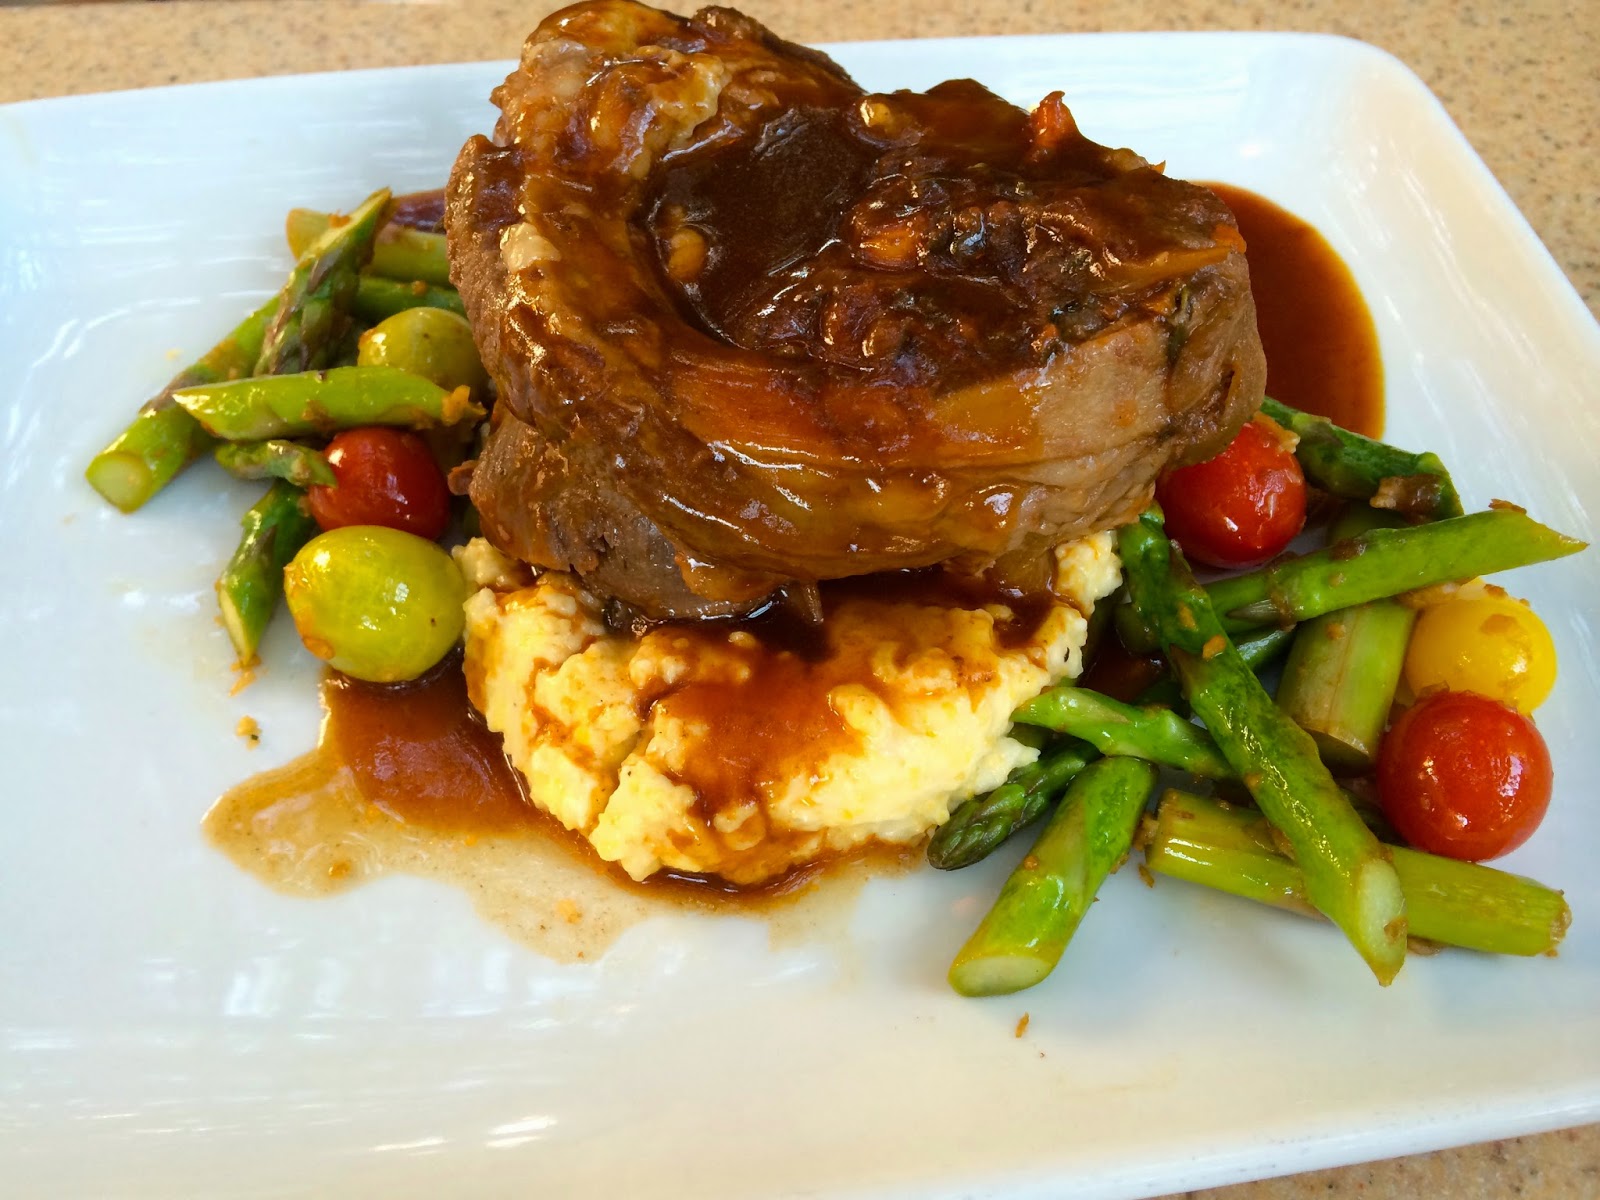 The osso buco, served with polenta  and seasonal veggies, is gluten free.